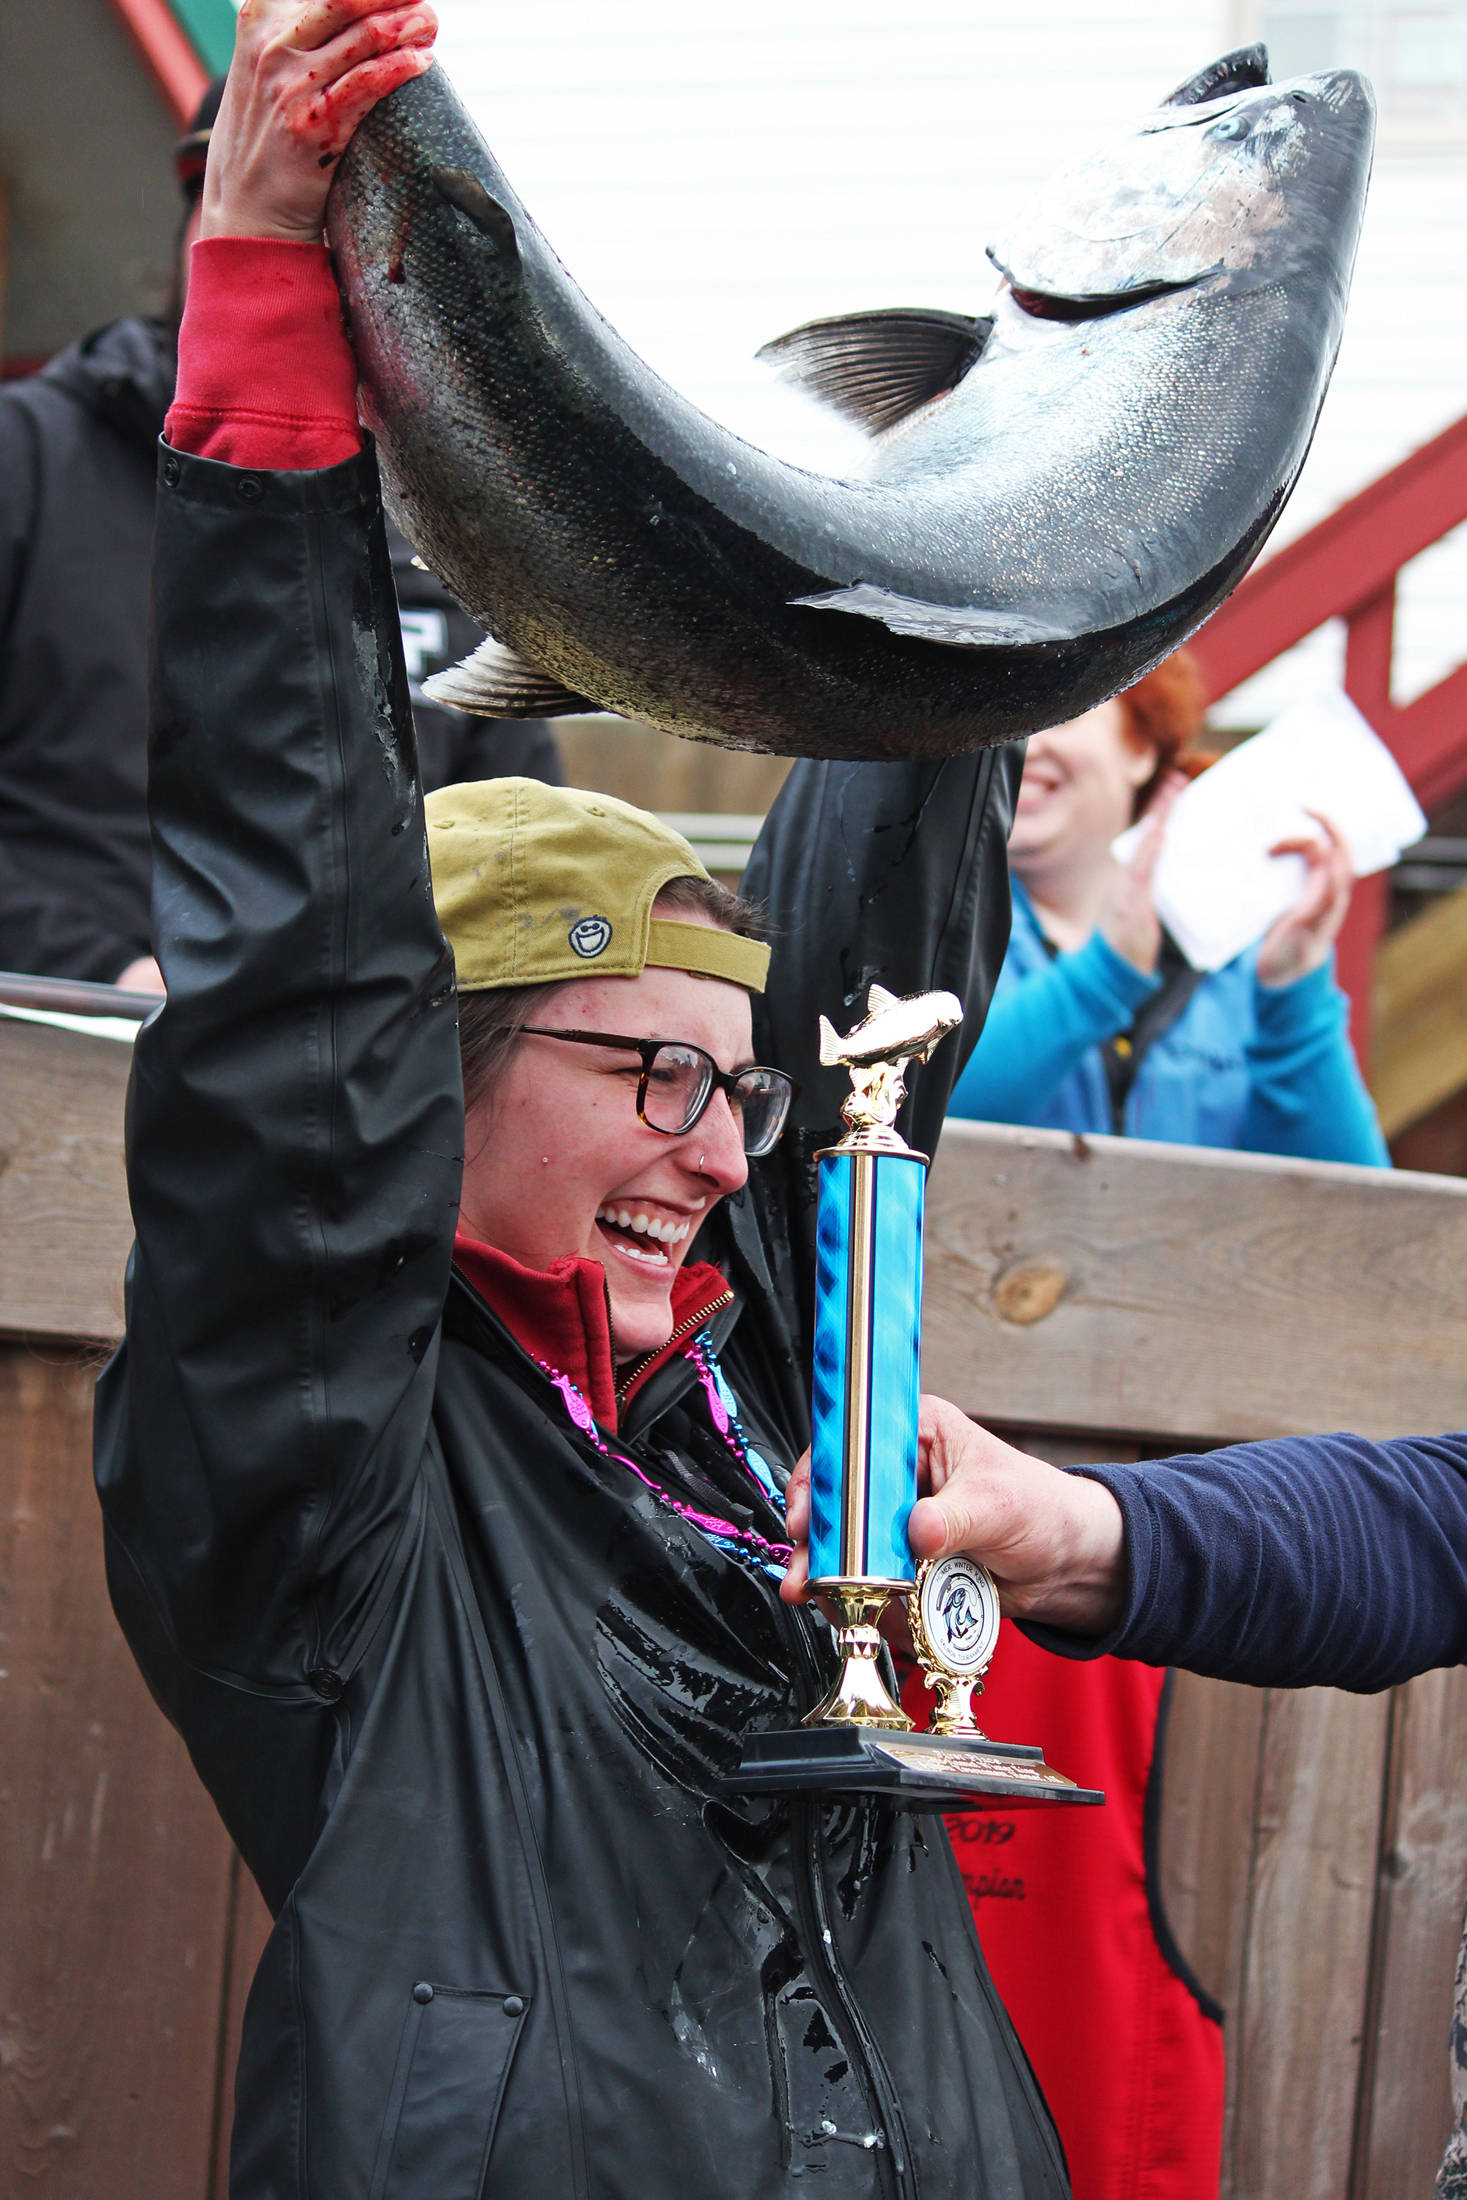 Shayna Perry, of Eagle River, holds up her winning 26.7-pound white salmon at the award ceremony following the Homer Winter King Salmon Tournament on March 23, 2019 at Coal Point Seafoods in Homer, Alaska. Perry, who also won the award for largest white salmon, was the first woman to win the annual tournament. (Photo by Megan Pacer/Homer News)